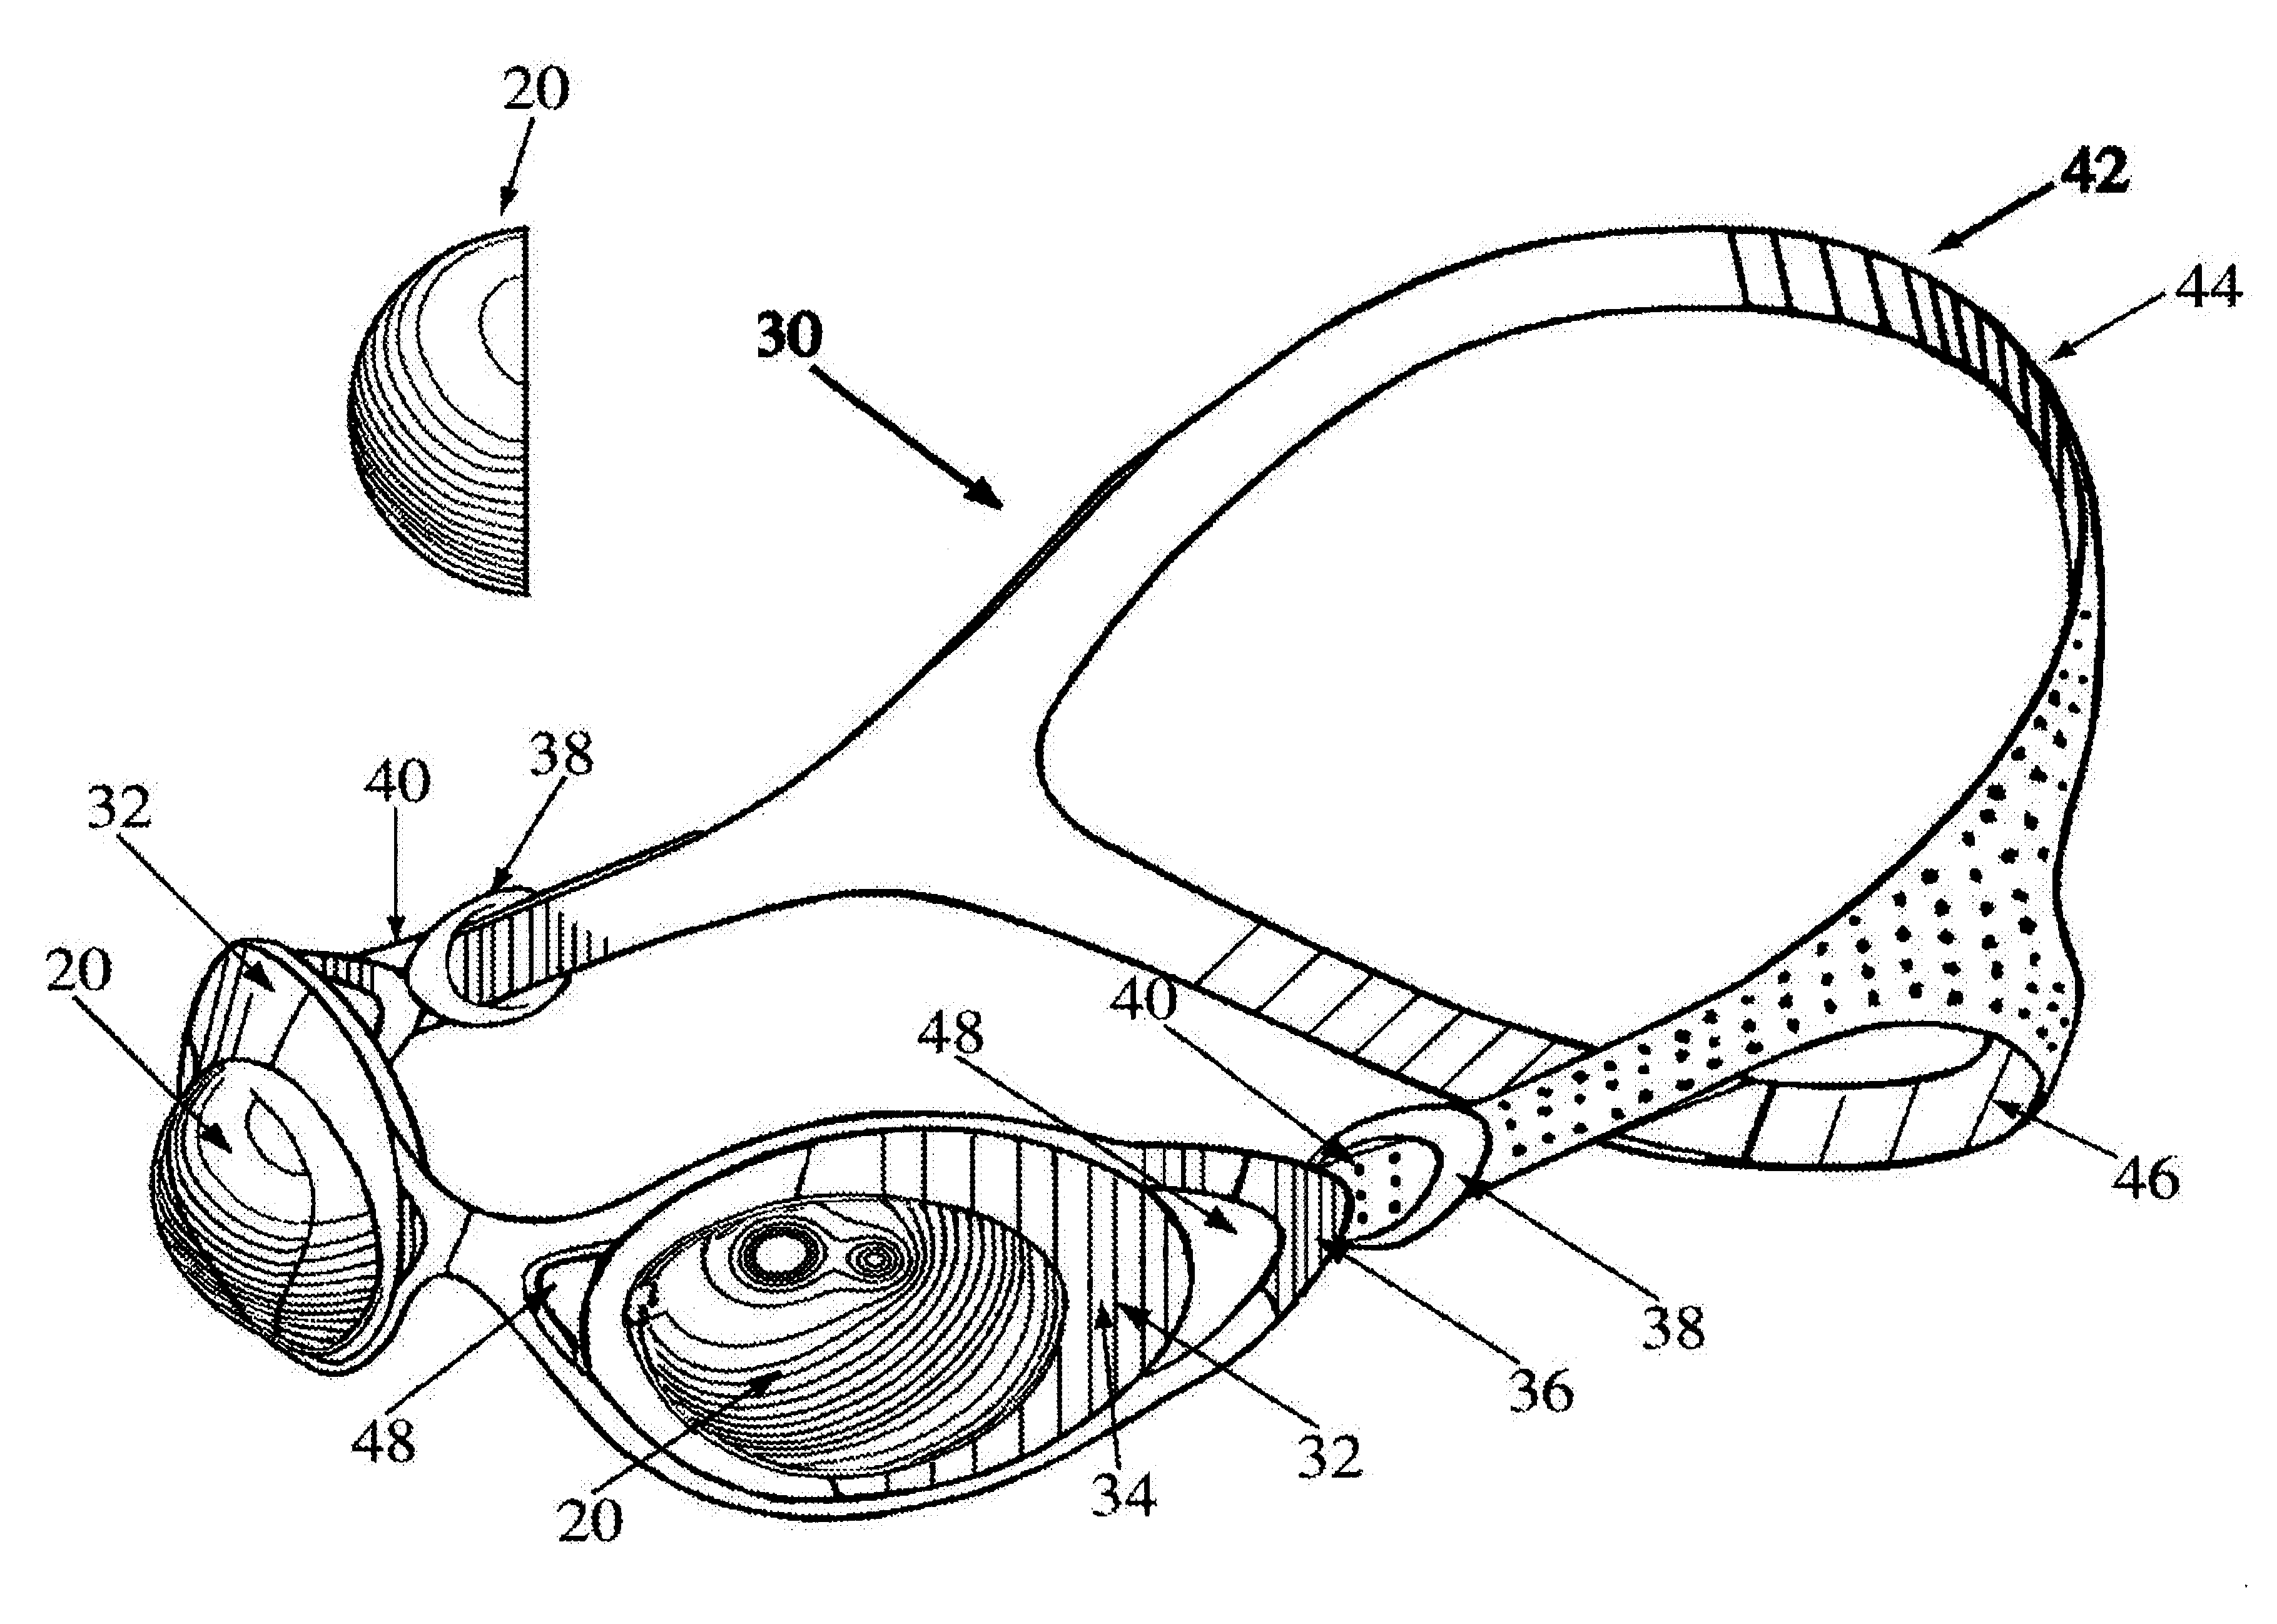 Toric-shaped lenses and goggle assembly